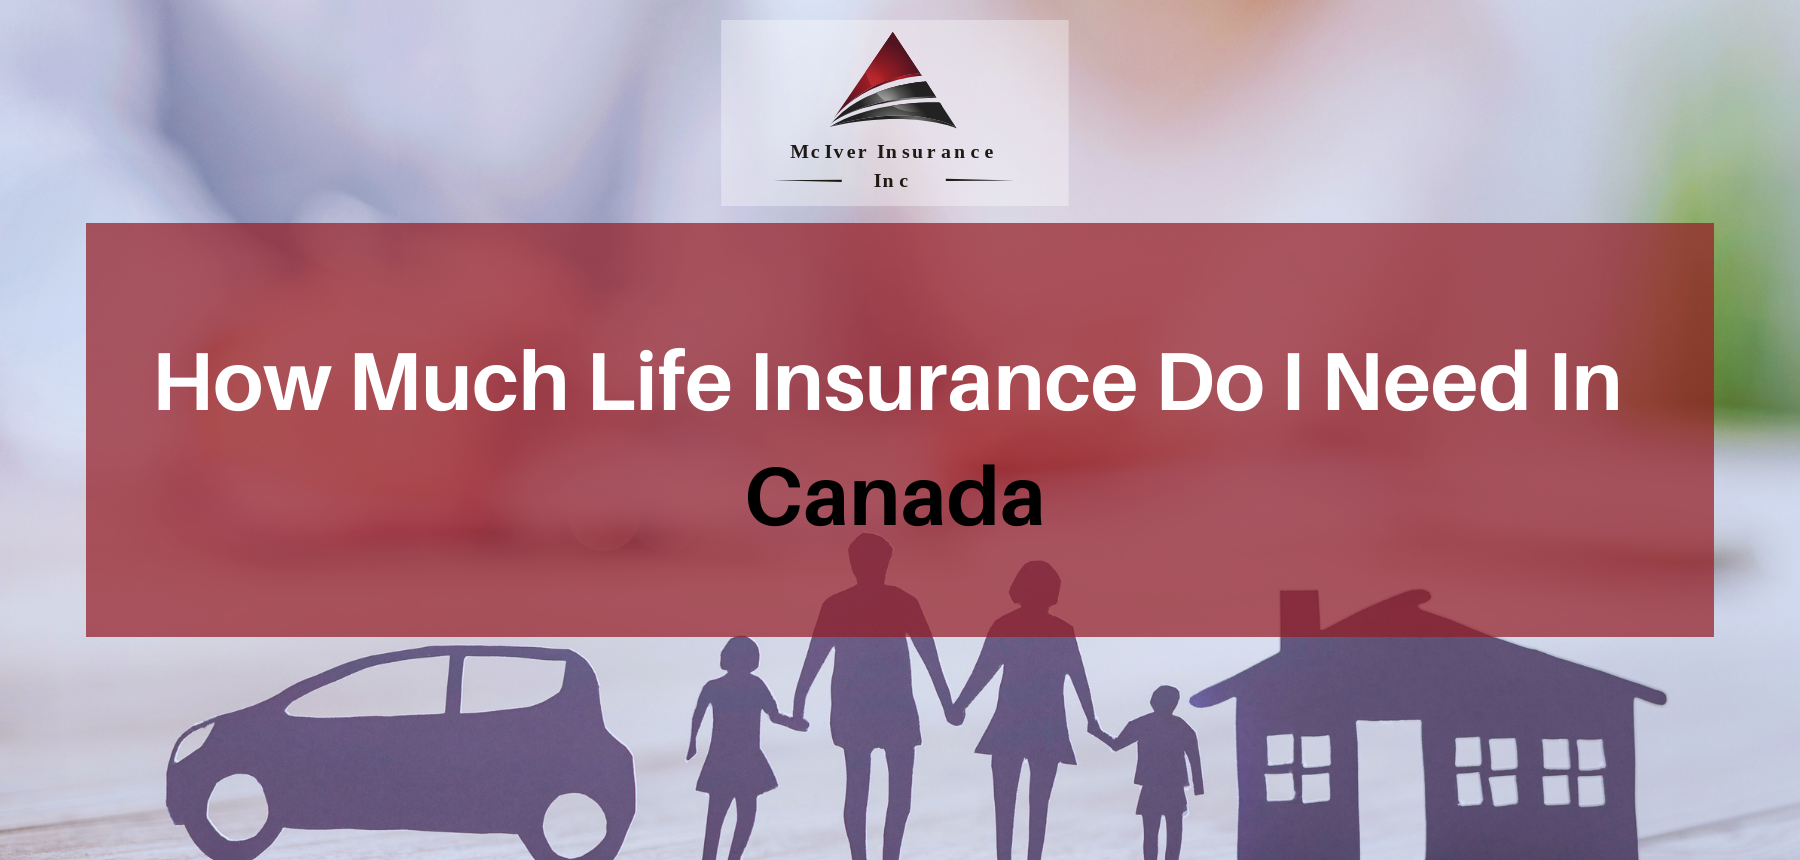 How Much Life Insurance Do I Need In Canada